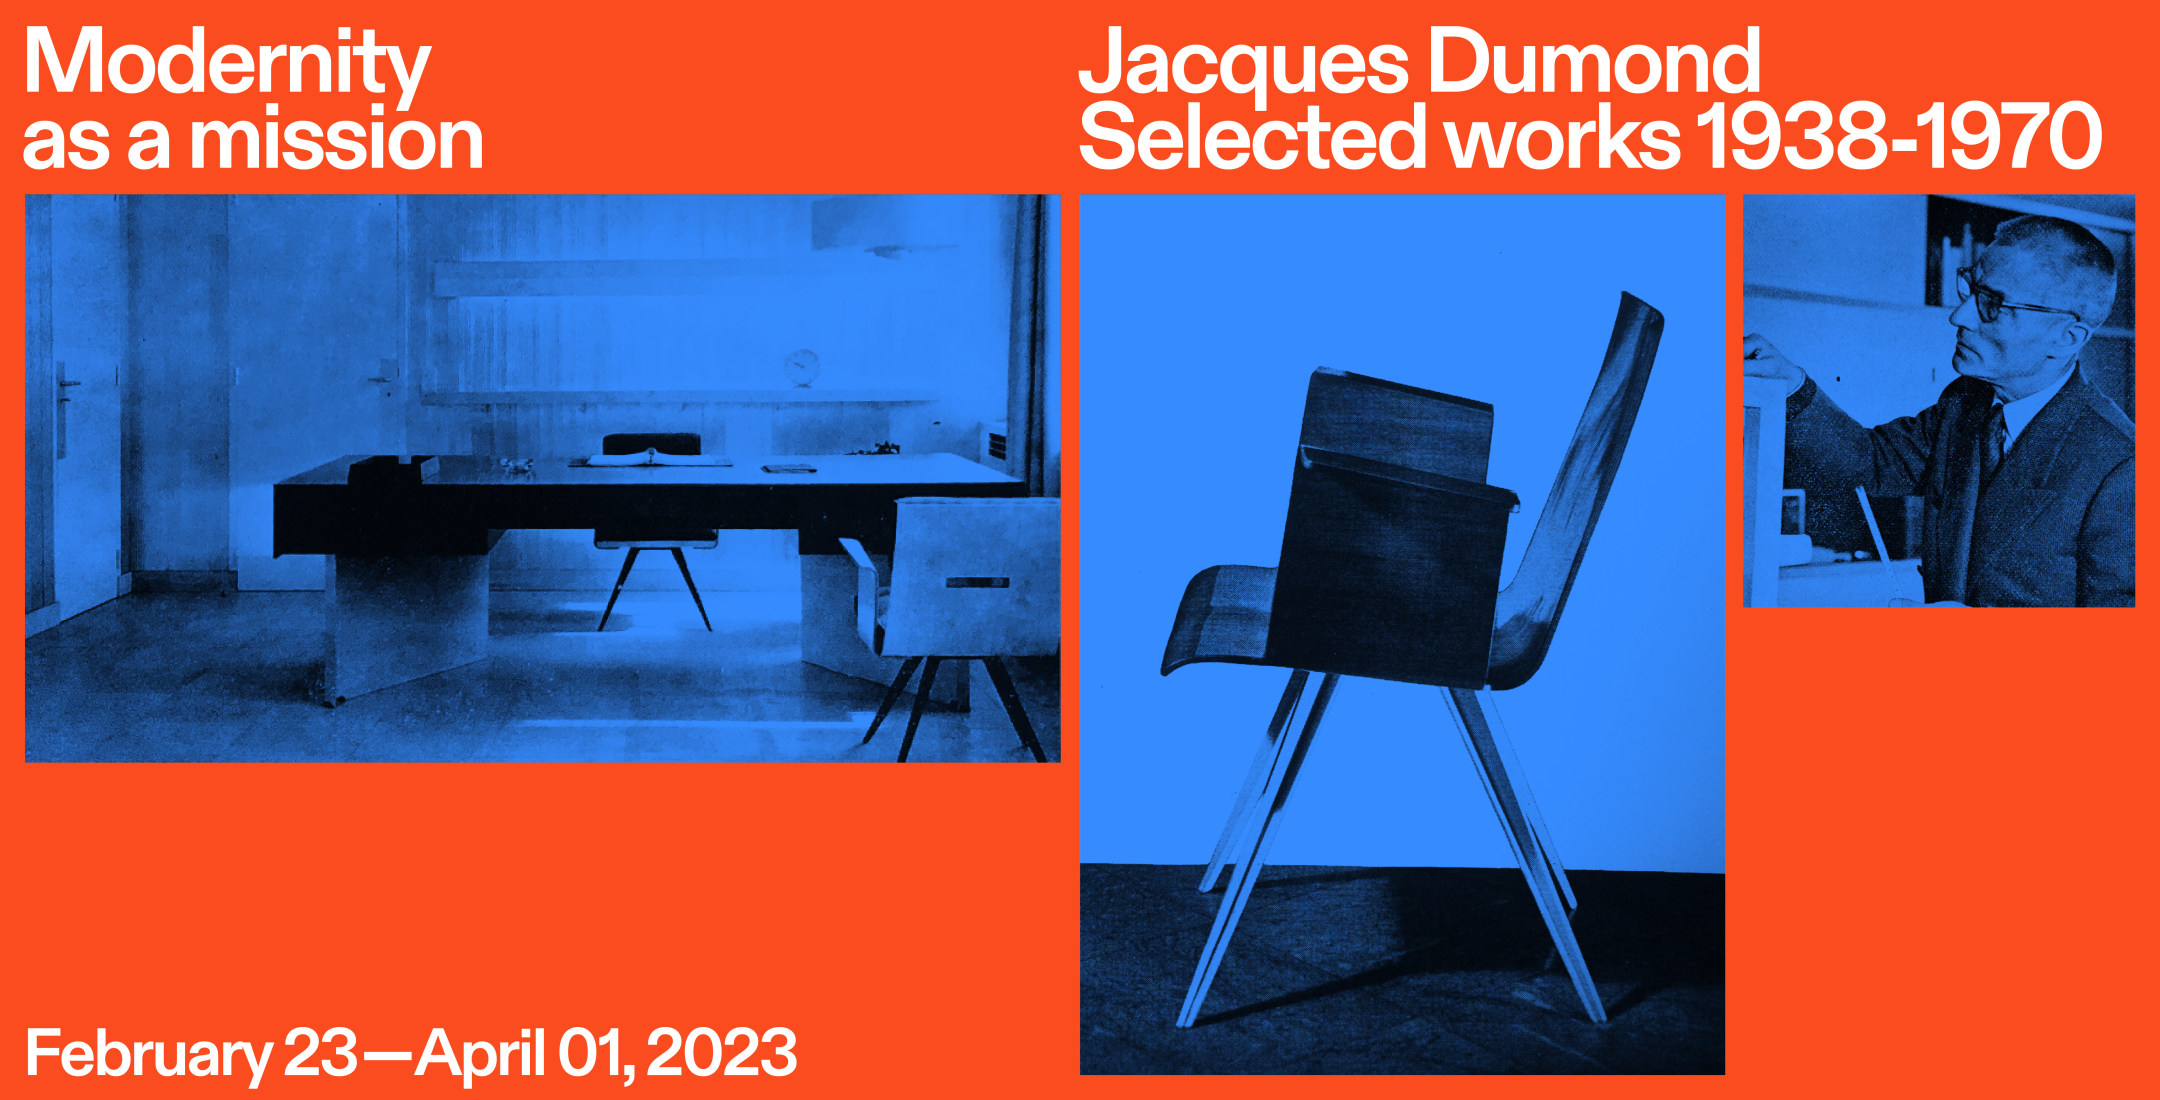 Modernity as a mission Jacques Dumond | Selected works 1938-1970 Exhibition graphic with image of 3 furnitures in blue and red.